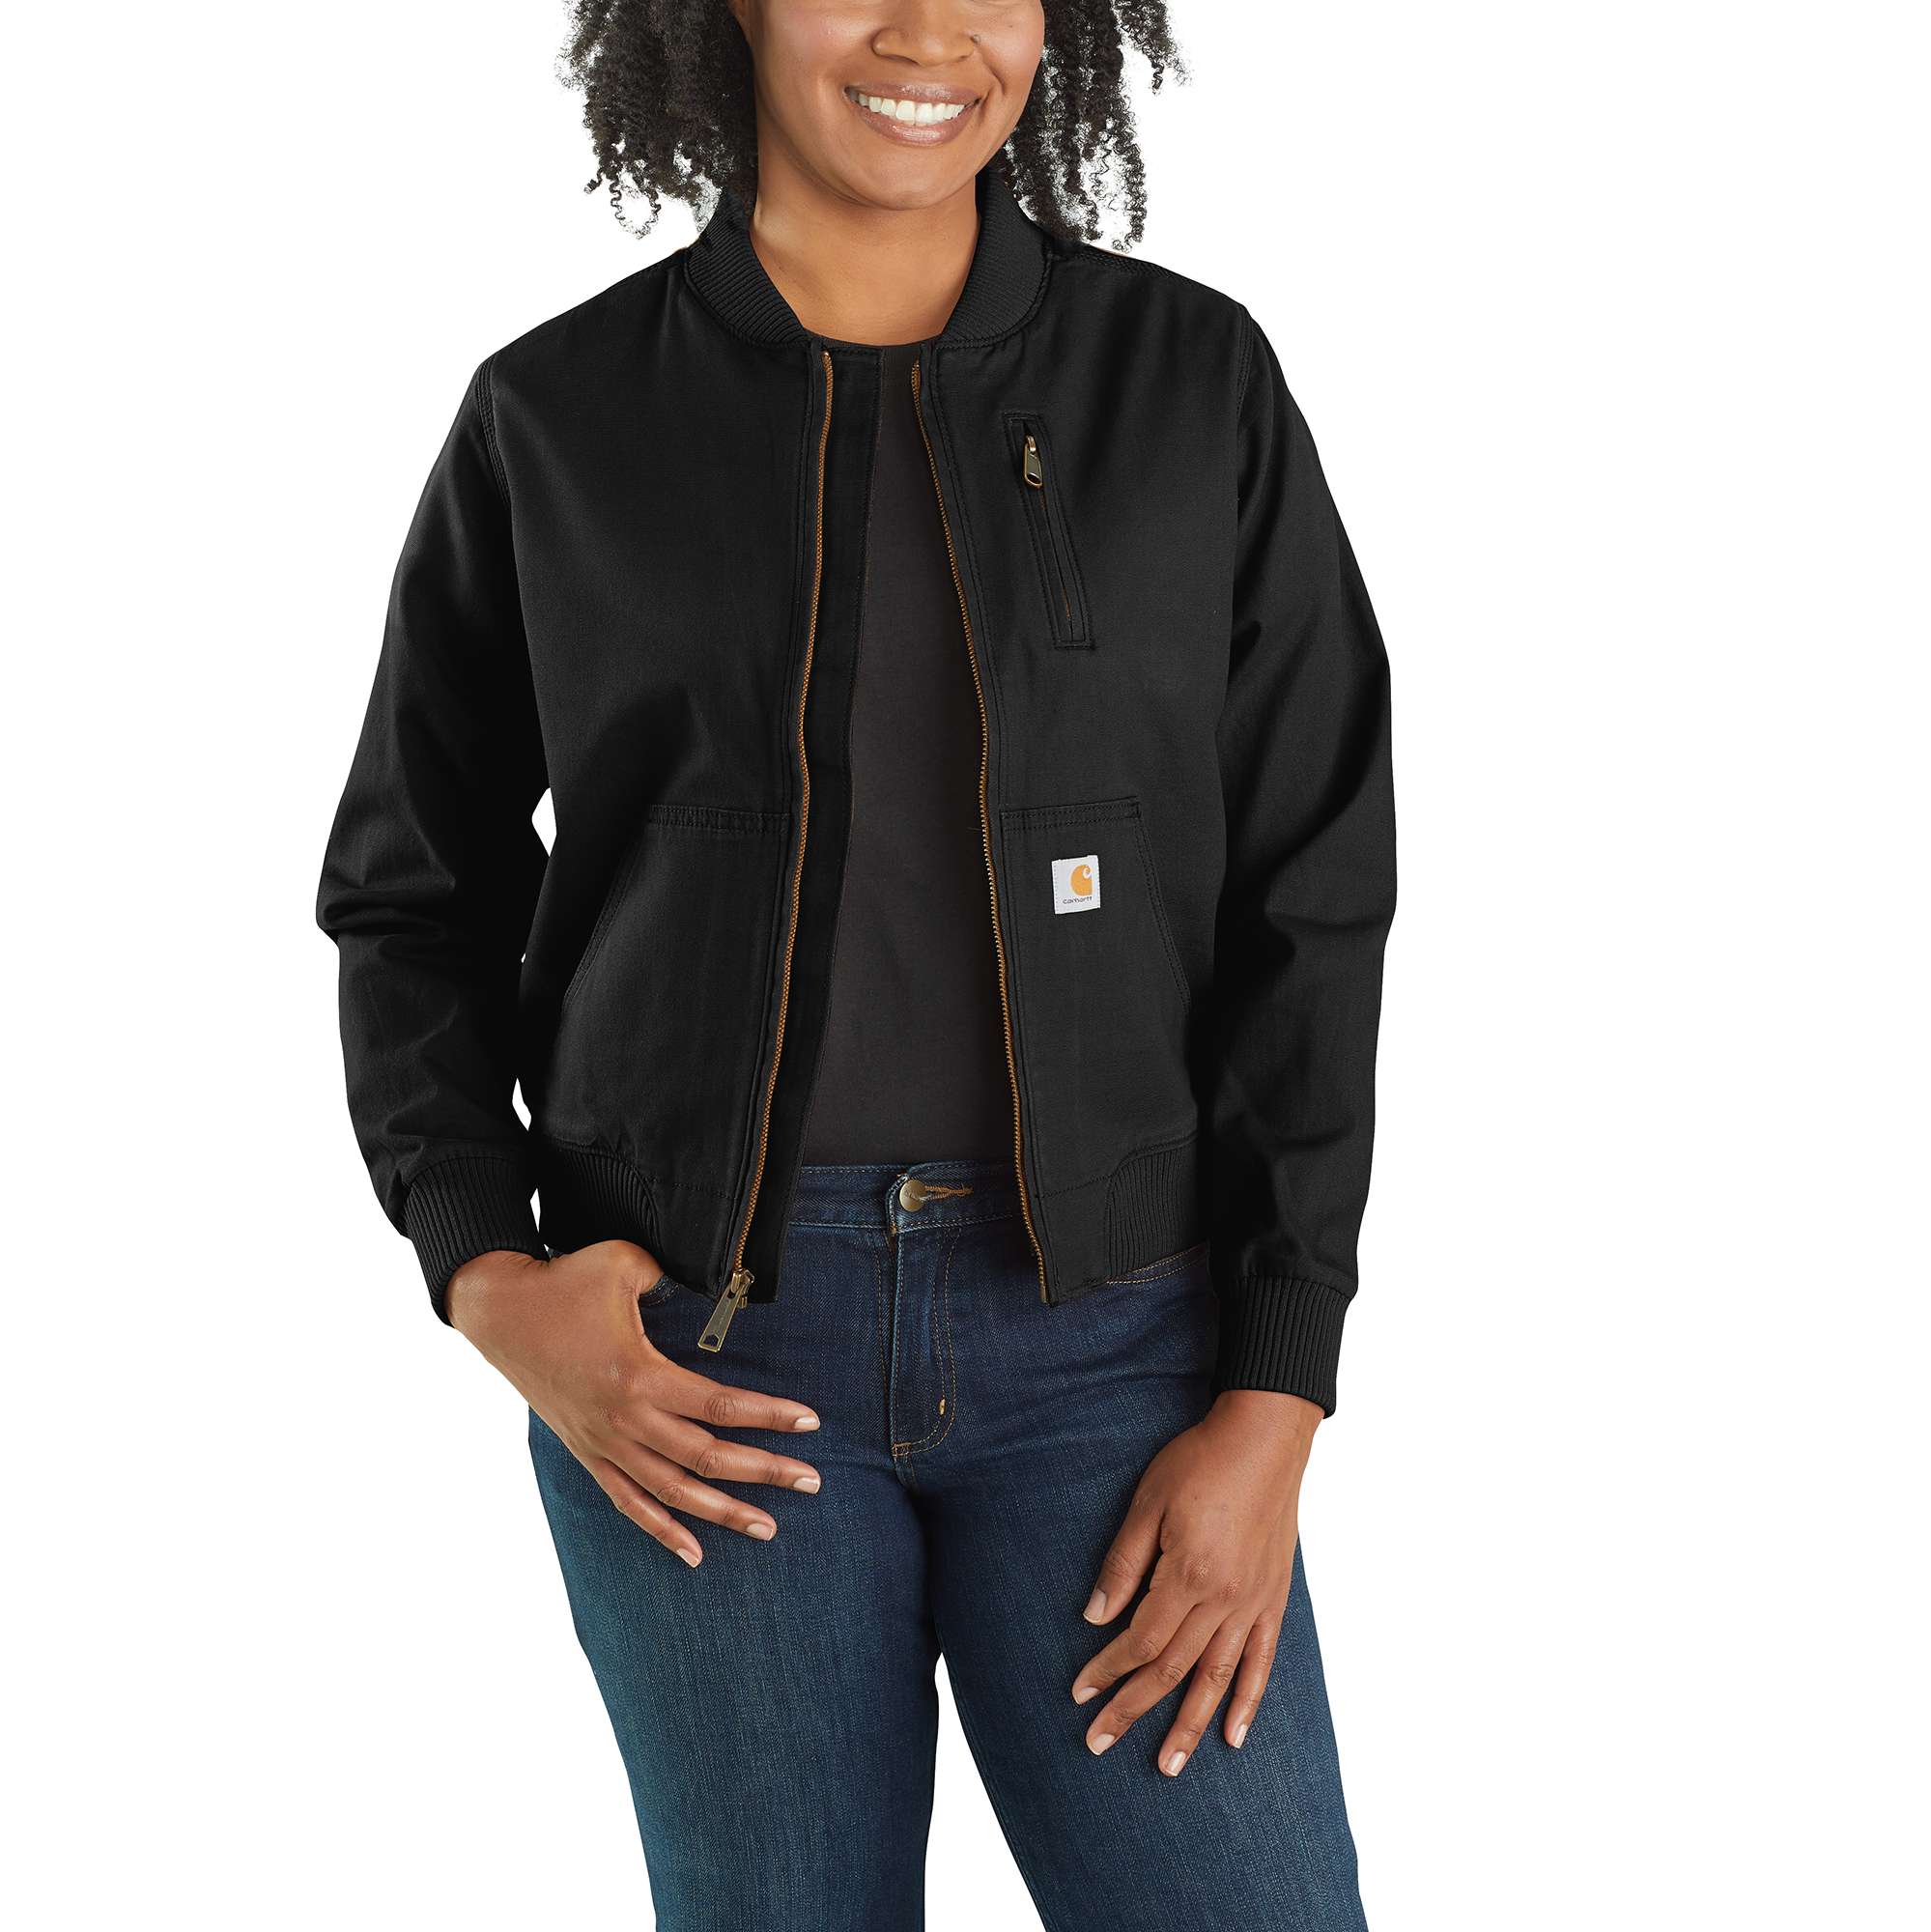  Carhartt Jackets Hooded Lined Jacket J131BLK - Black - 2X Large  Tall: Health And Personal Care: Clothing, Shoes & Jewelry